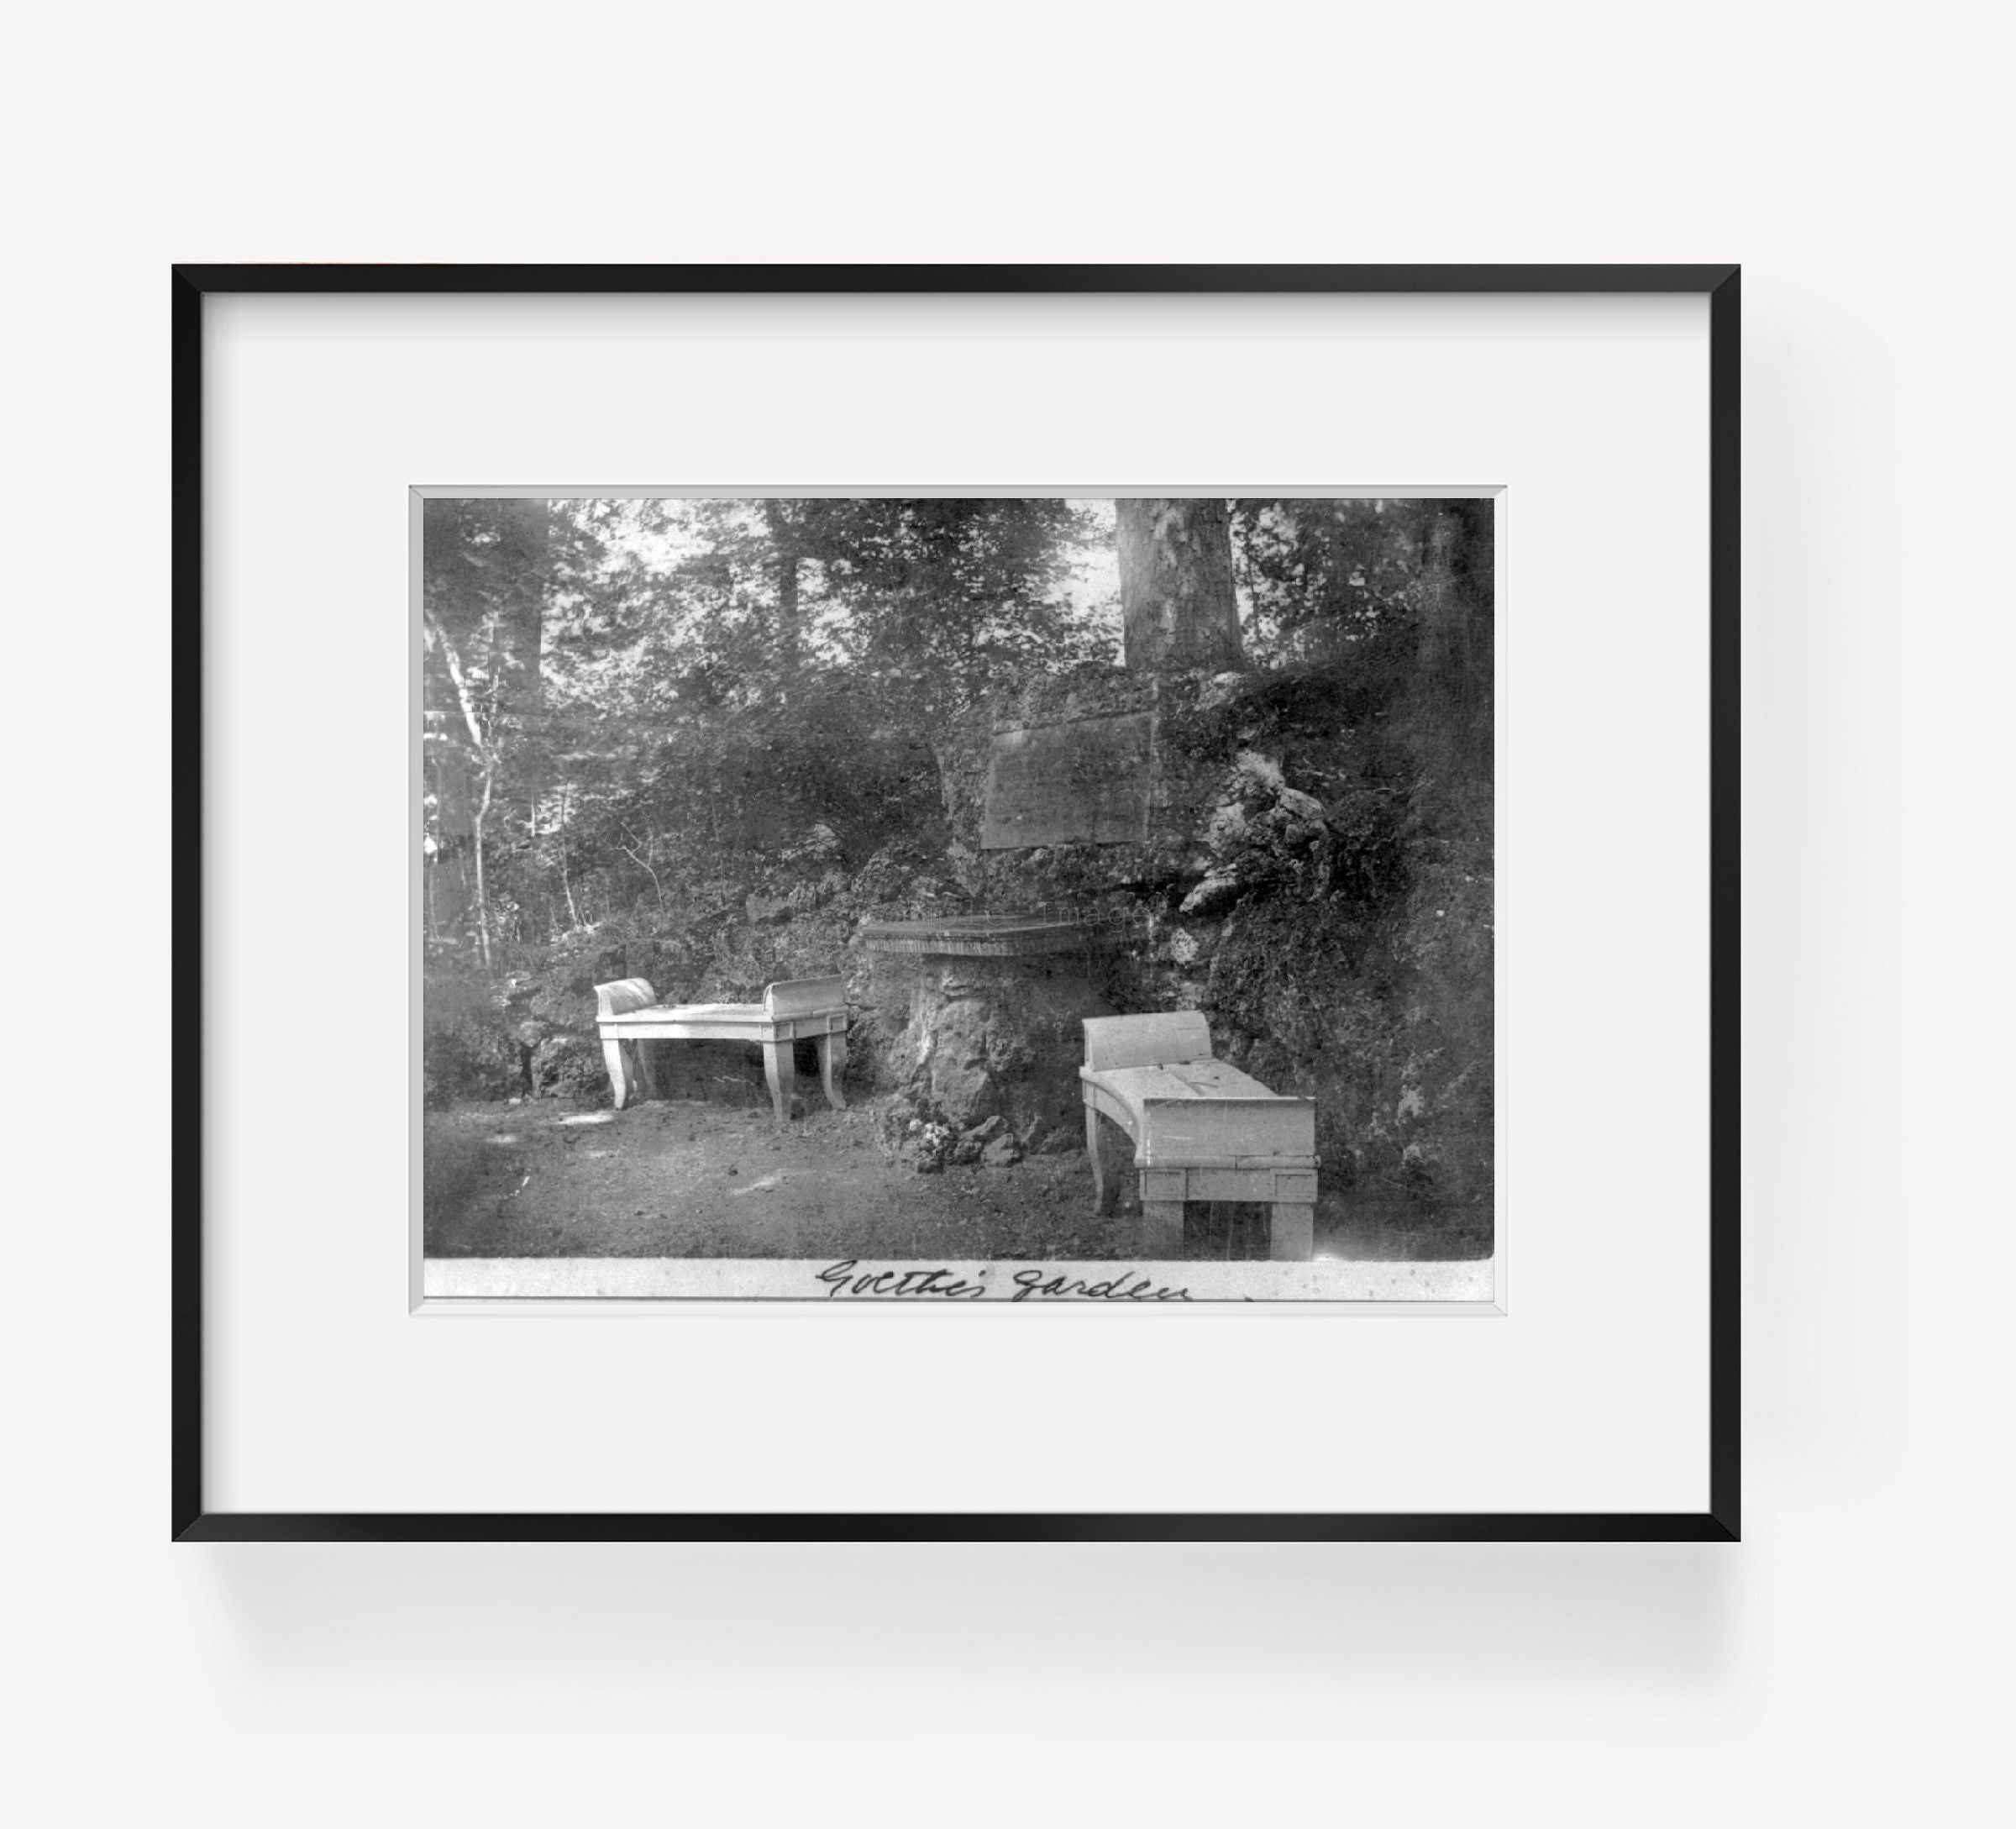 Photo: Goethe's garden, Weimar, Germany, Thuringia, benches, trees